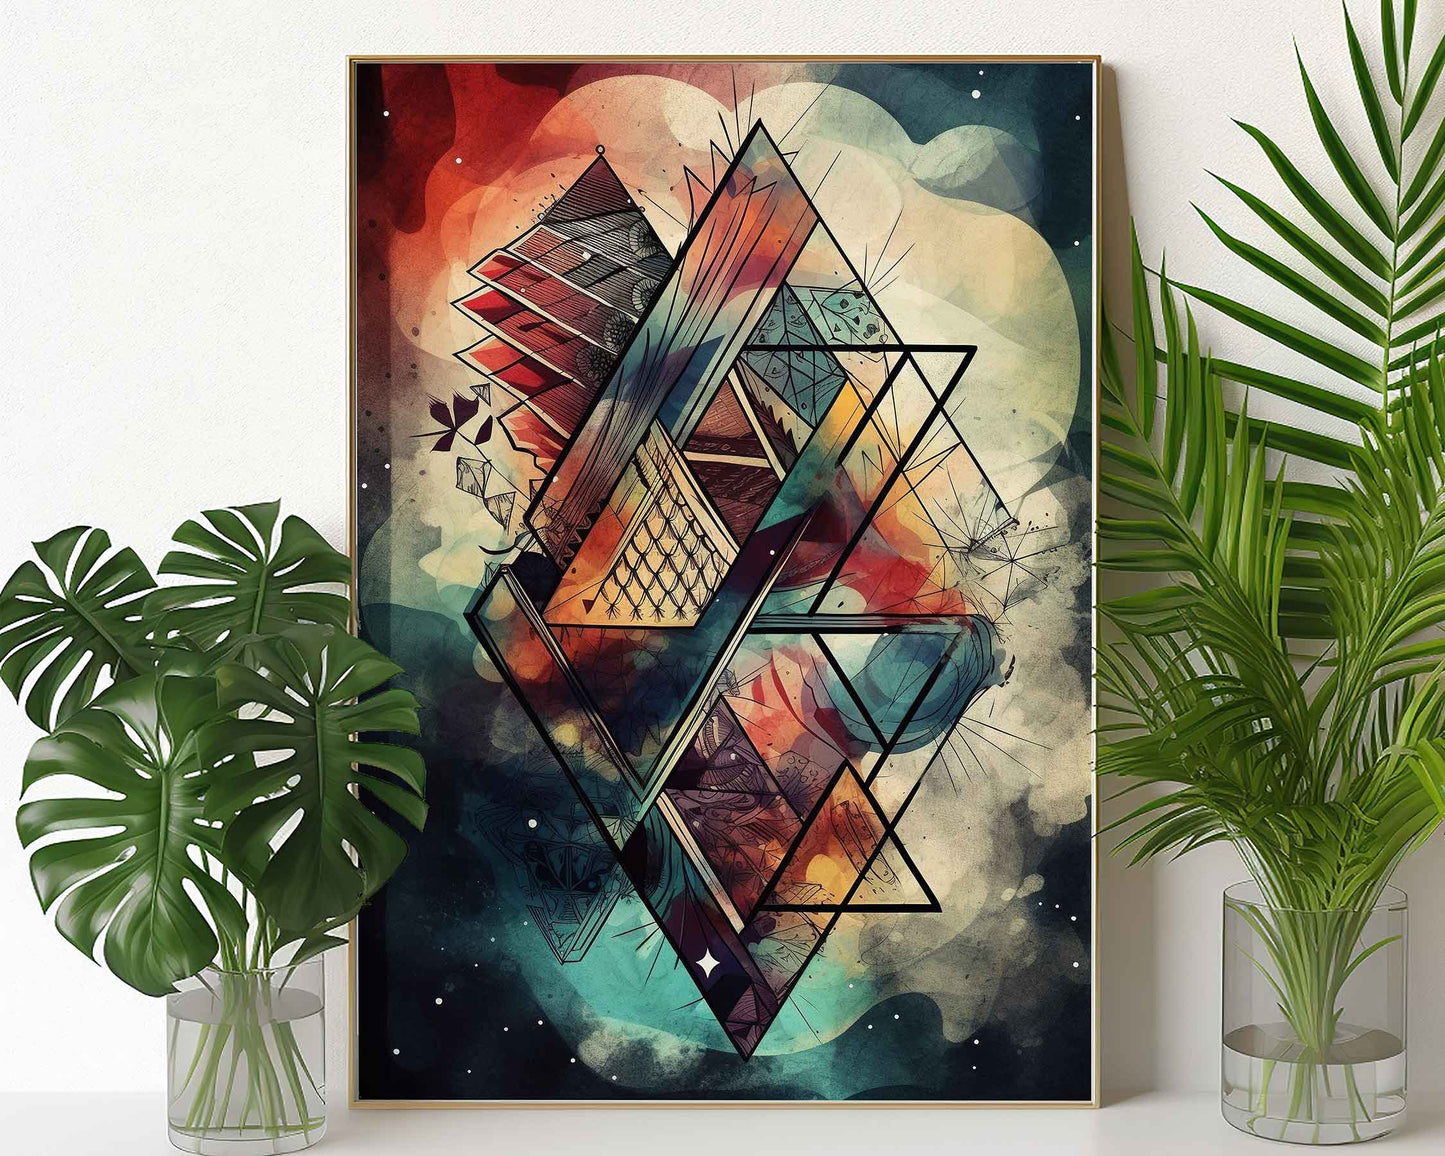 Framed Image of Boho Geometric Aztec Tribal Abstract Style Wall Art Poster Prints